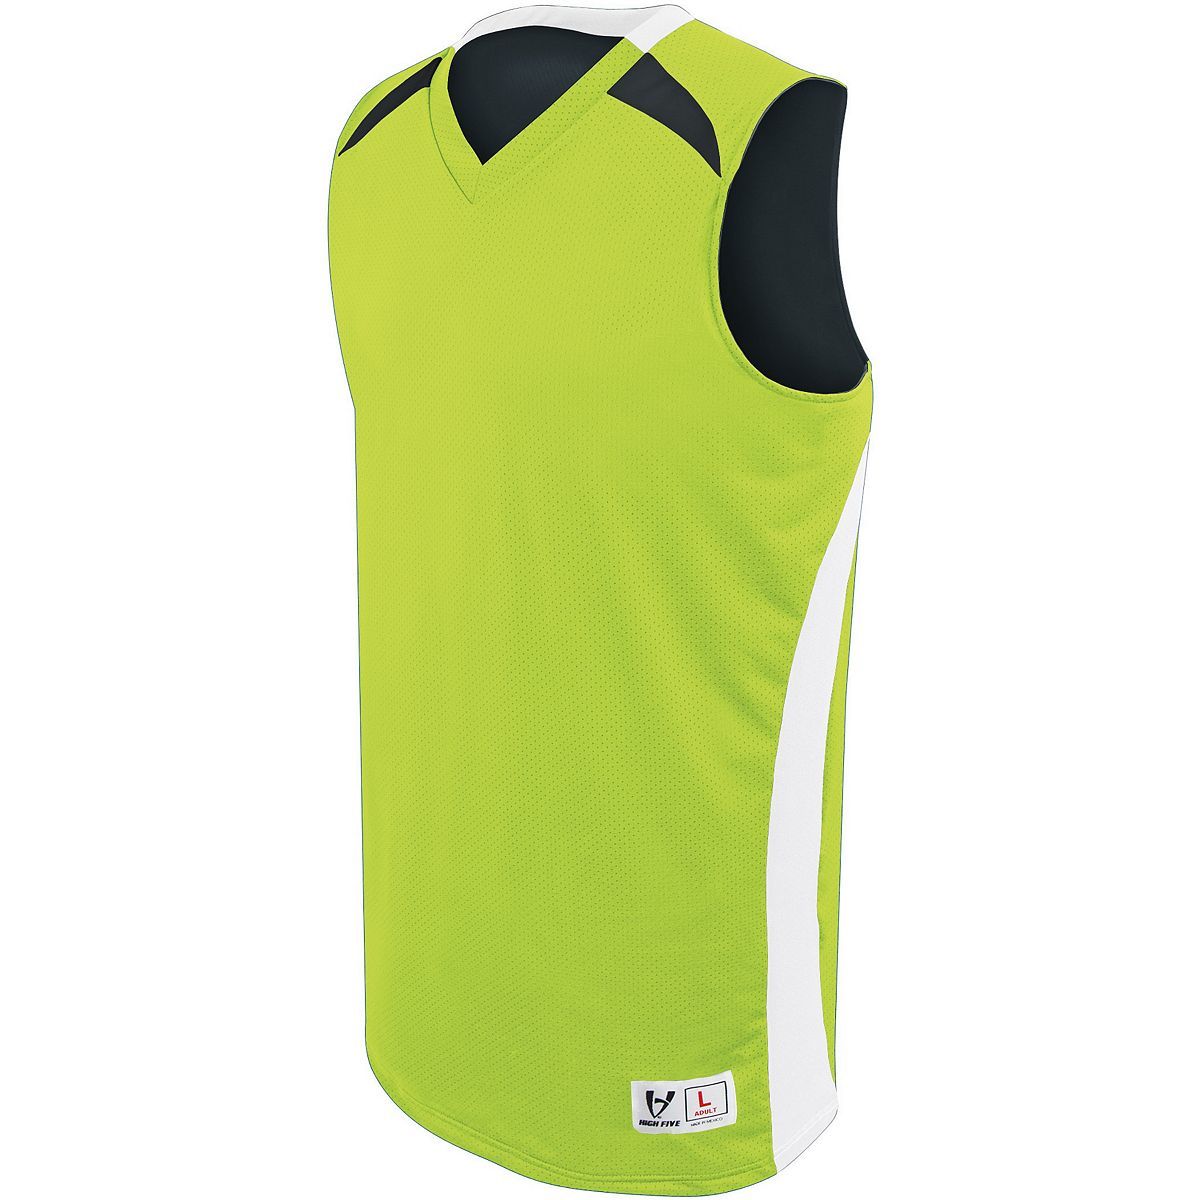 Holloway Campus Reversible Jersey in Lime/White/Black  -Part of the Adult, Adult-Jersey, Basketball, Holloway, Shirts, All-Sports, All-Sports-1 product lines at KanaleyCreations.com